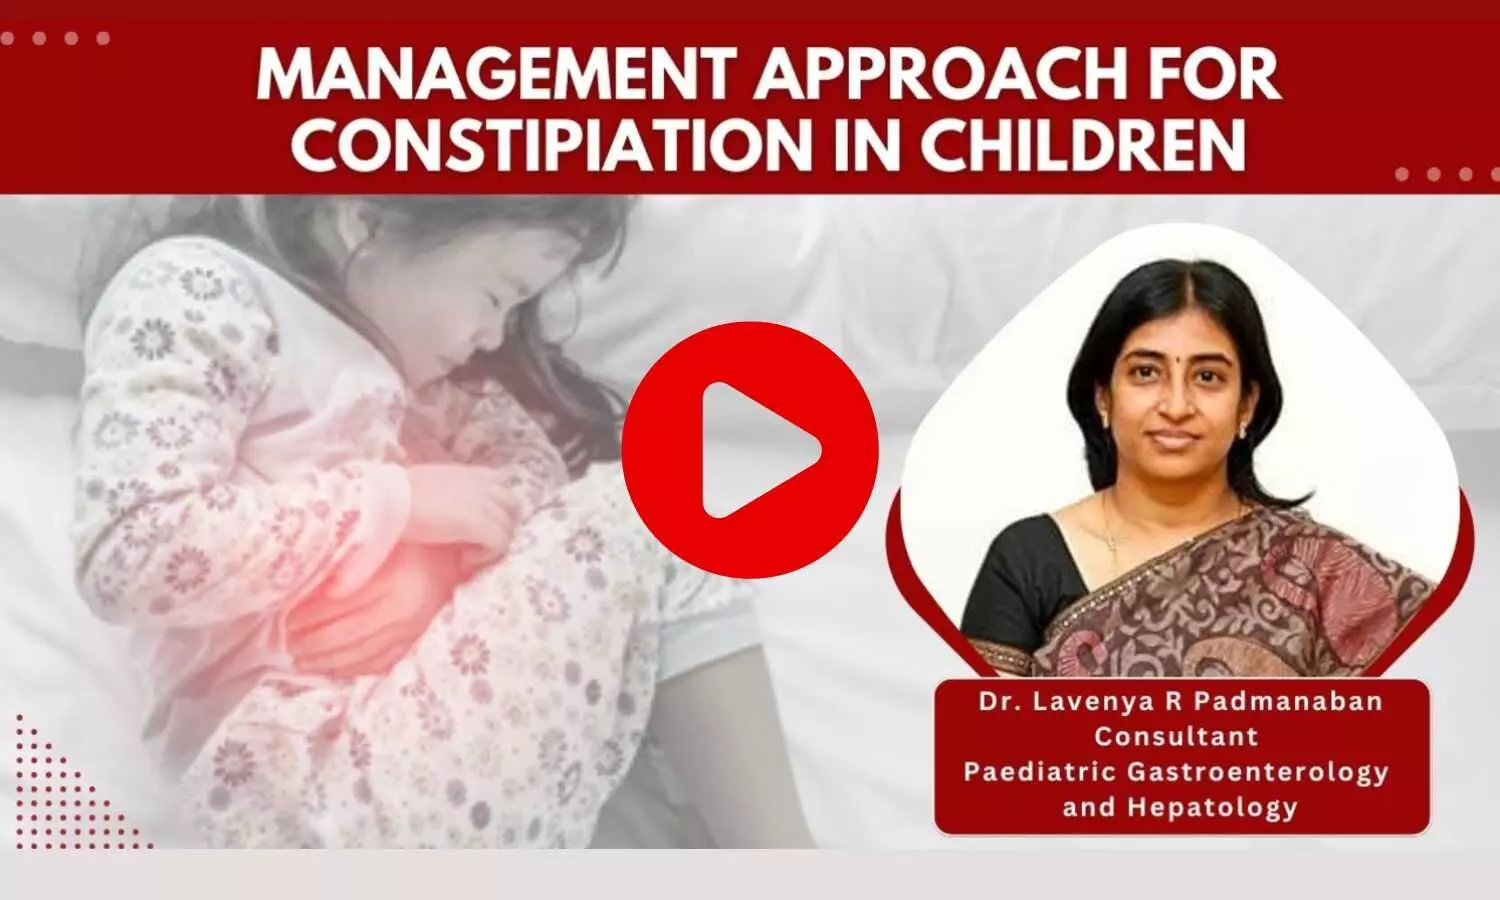 How to manage constipation in children- Ft. Dr. Lavenya R Padmanaban